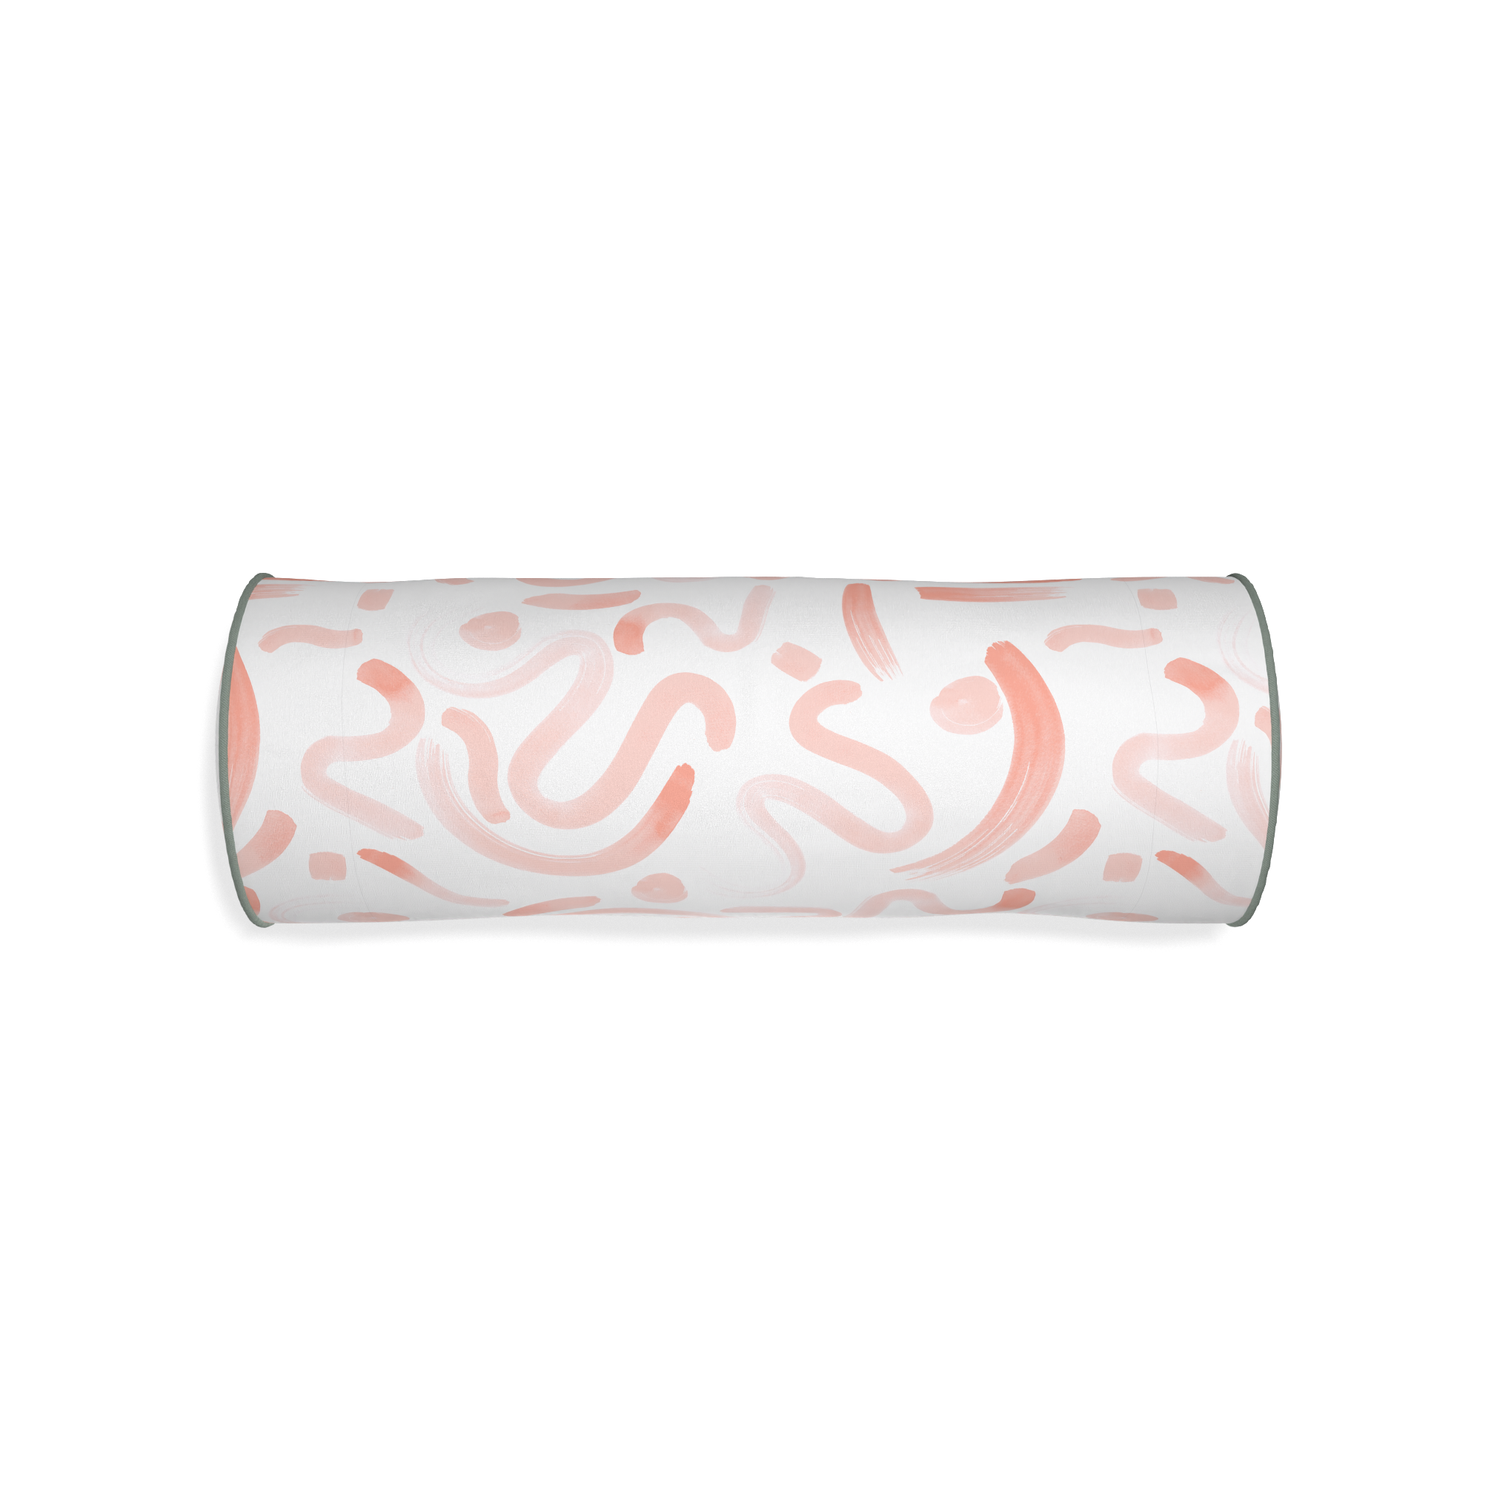 Bolster hockney pink custom pink graphicpillow with sage piping on white background